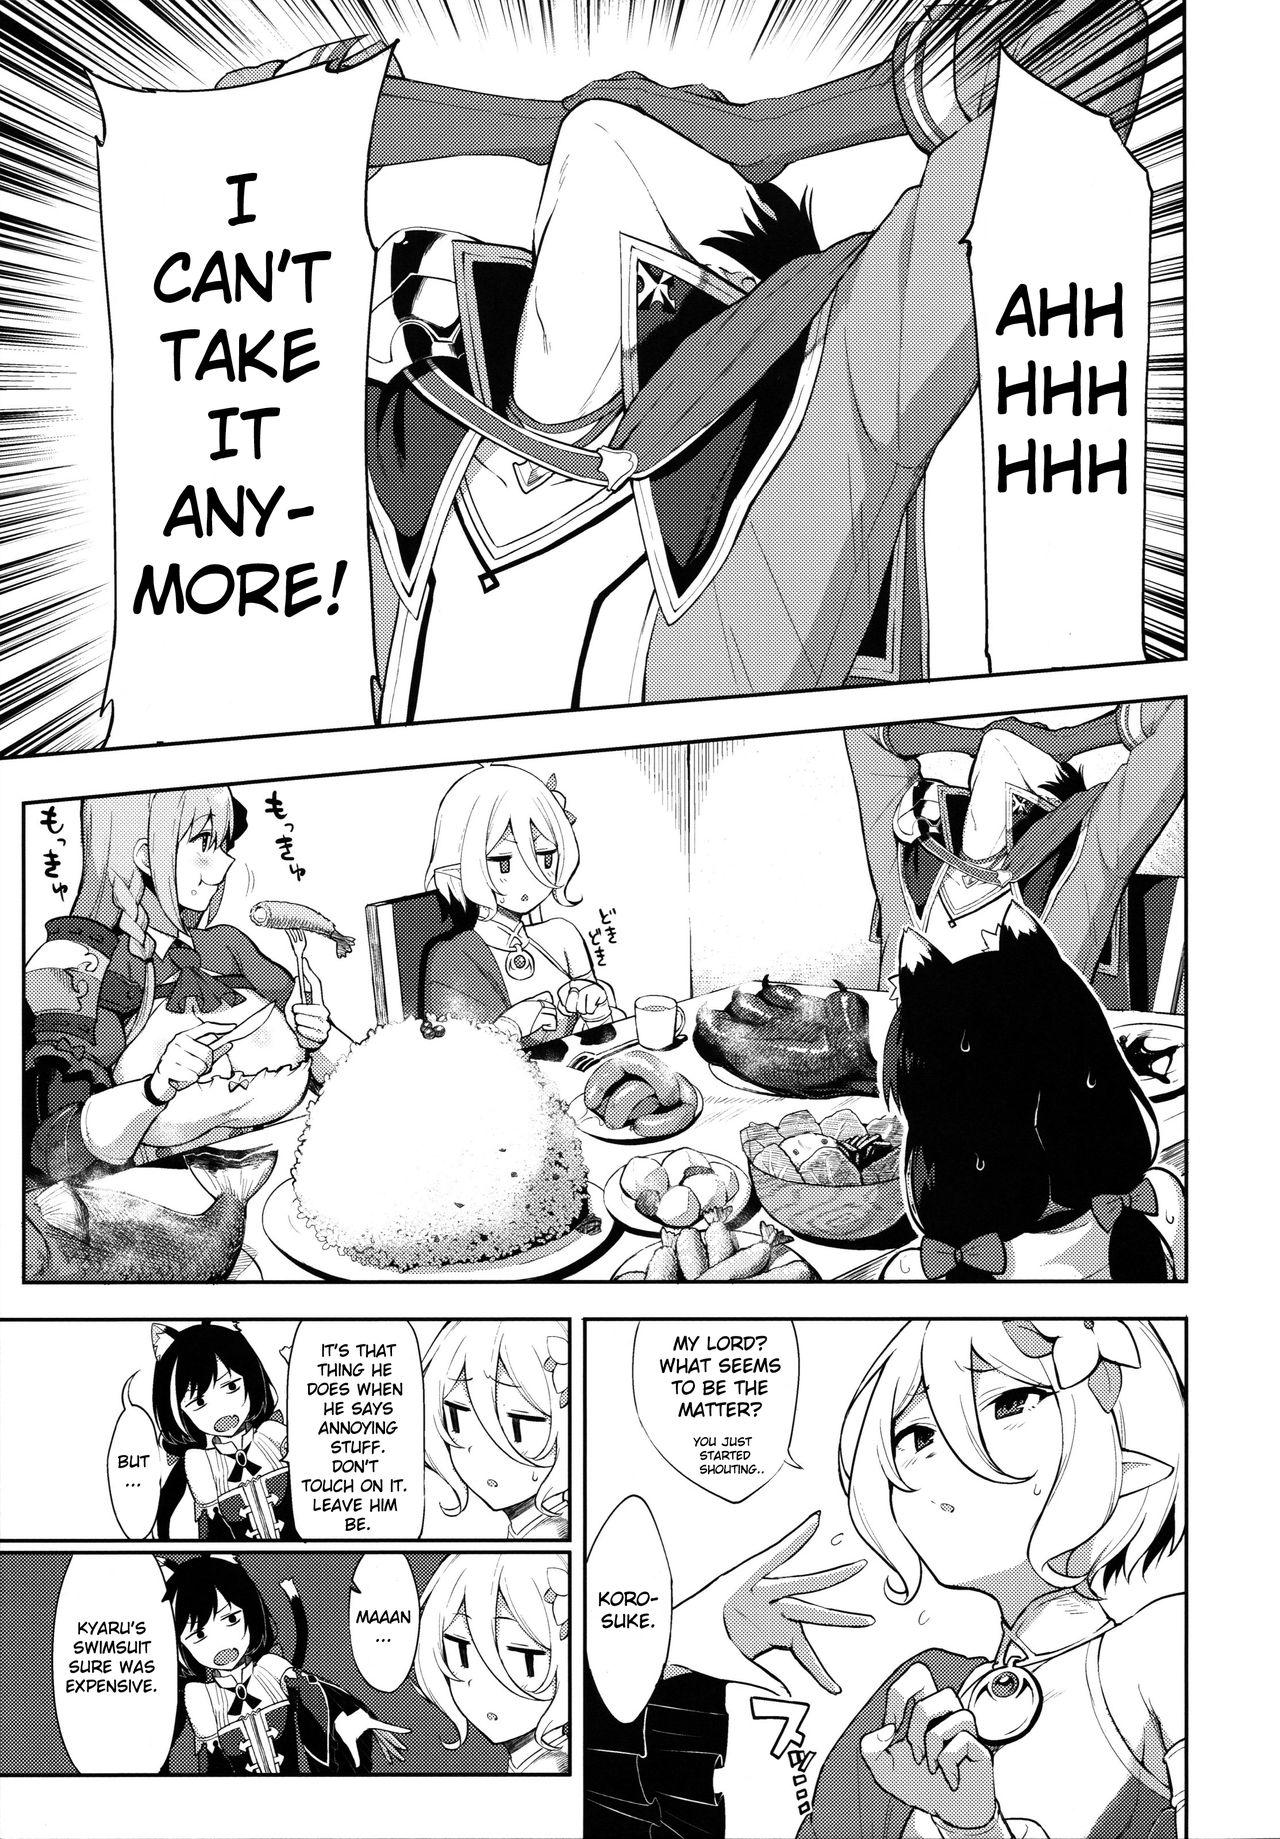 Cum Princess to Connect Shitai! ReDive! | I want to connect with a princess! ReDive! - Princess connect Crazy - Page 2